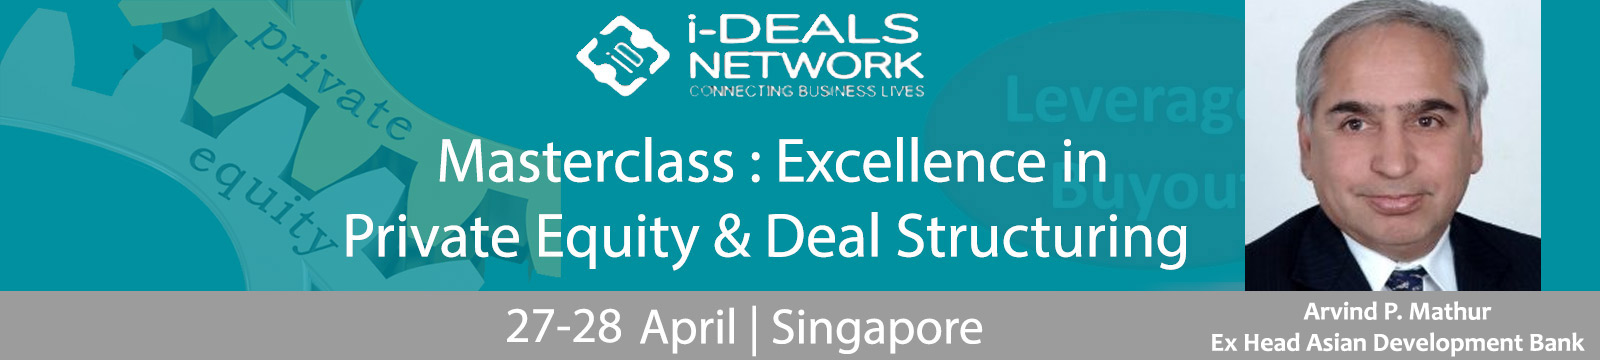 Masterclass Excellence in Private Equity and Deal Structuring, Central, Singapore